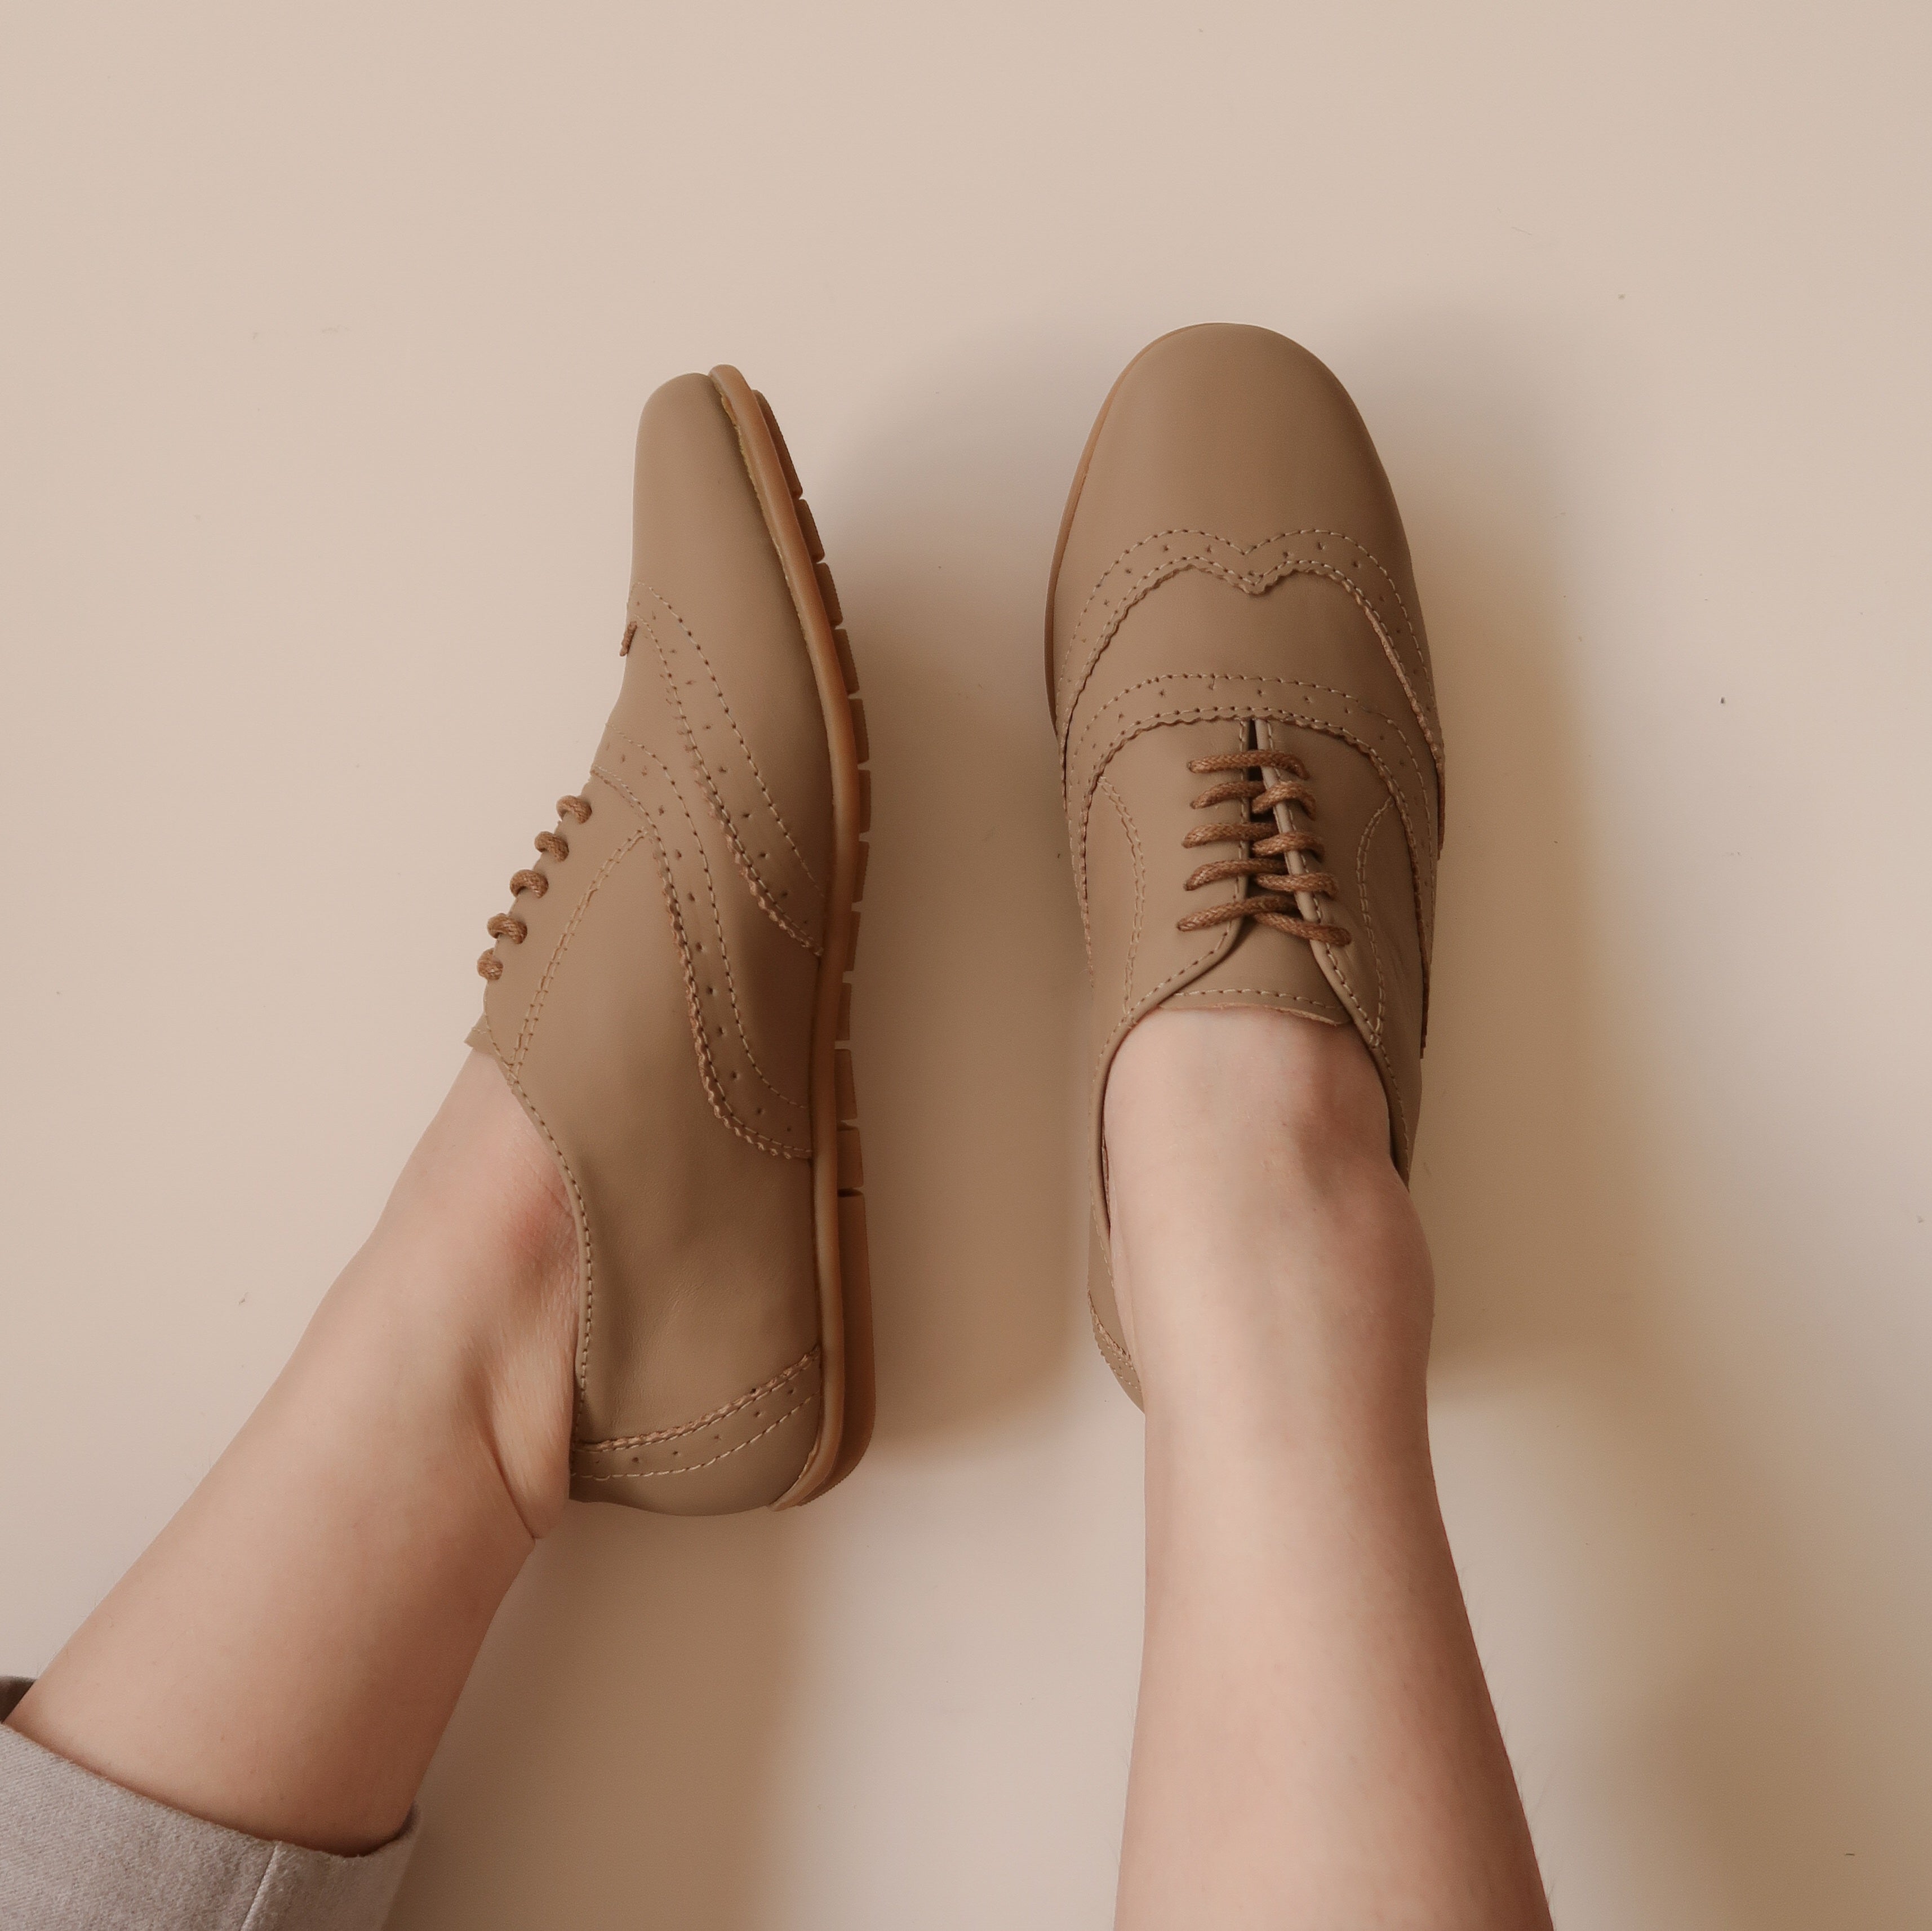 Aster in Beige - Brogues - Rob and Mara